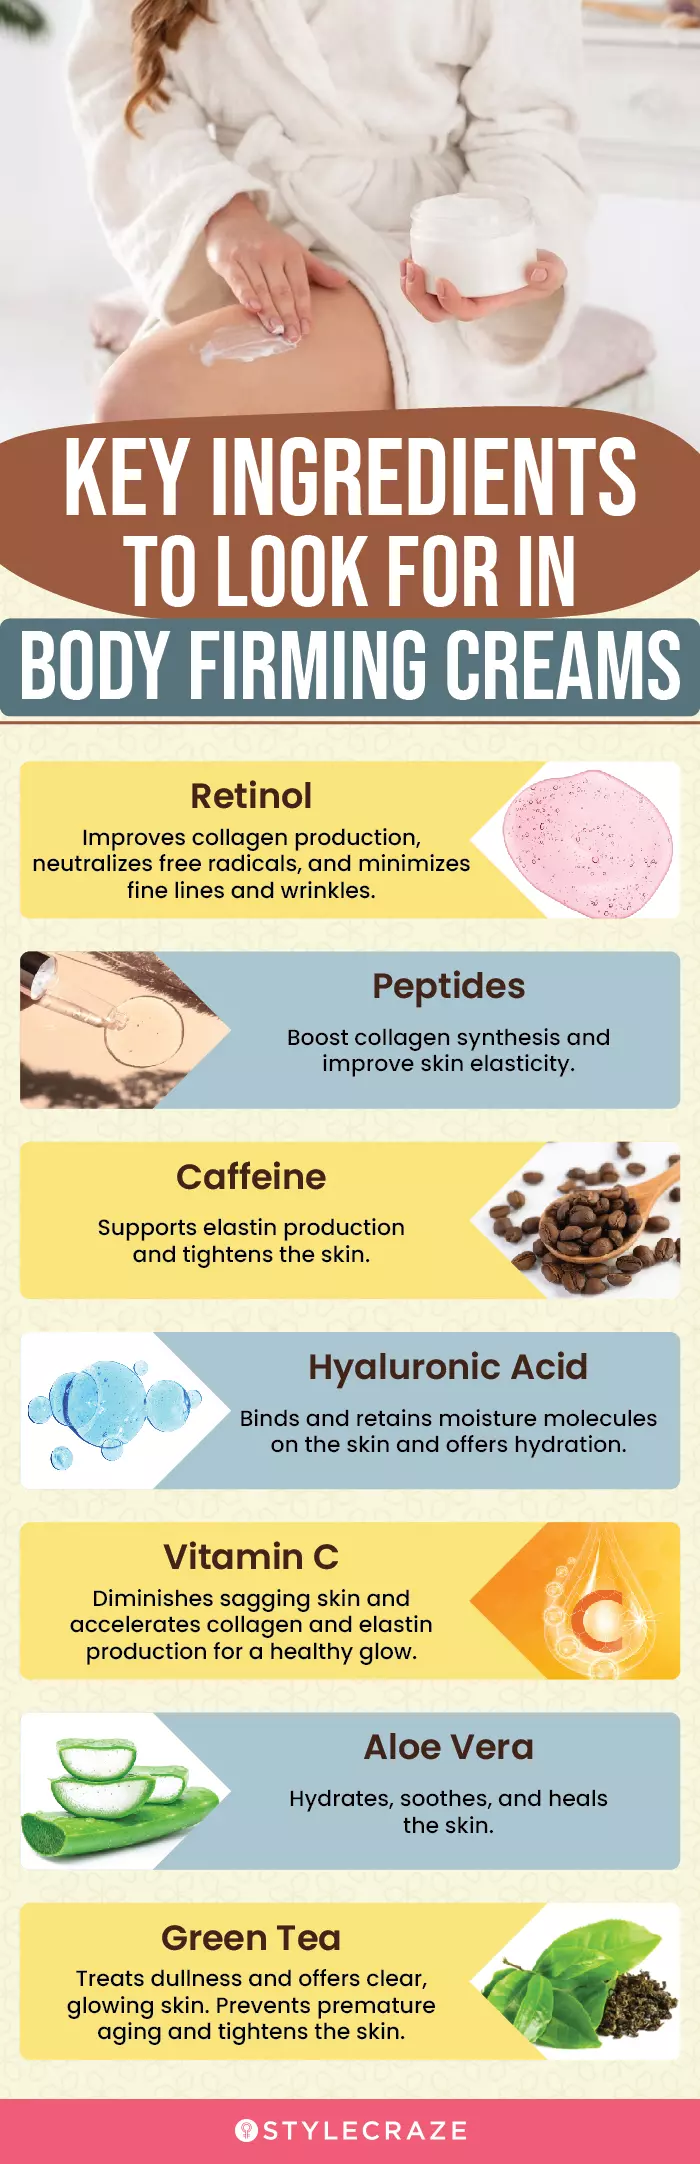 Key Ingredients To Look For In Body Firming Creams (infographic)